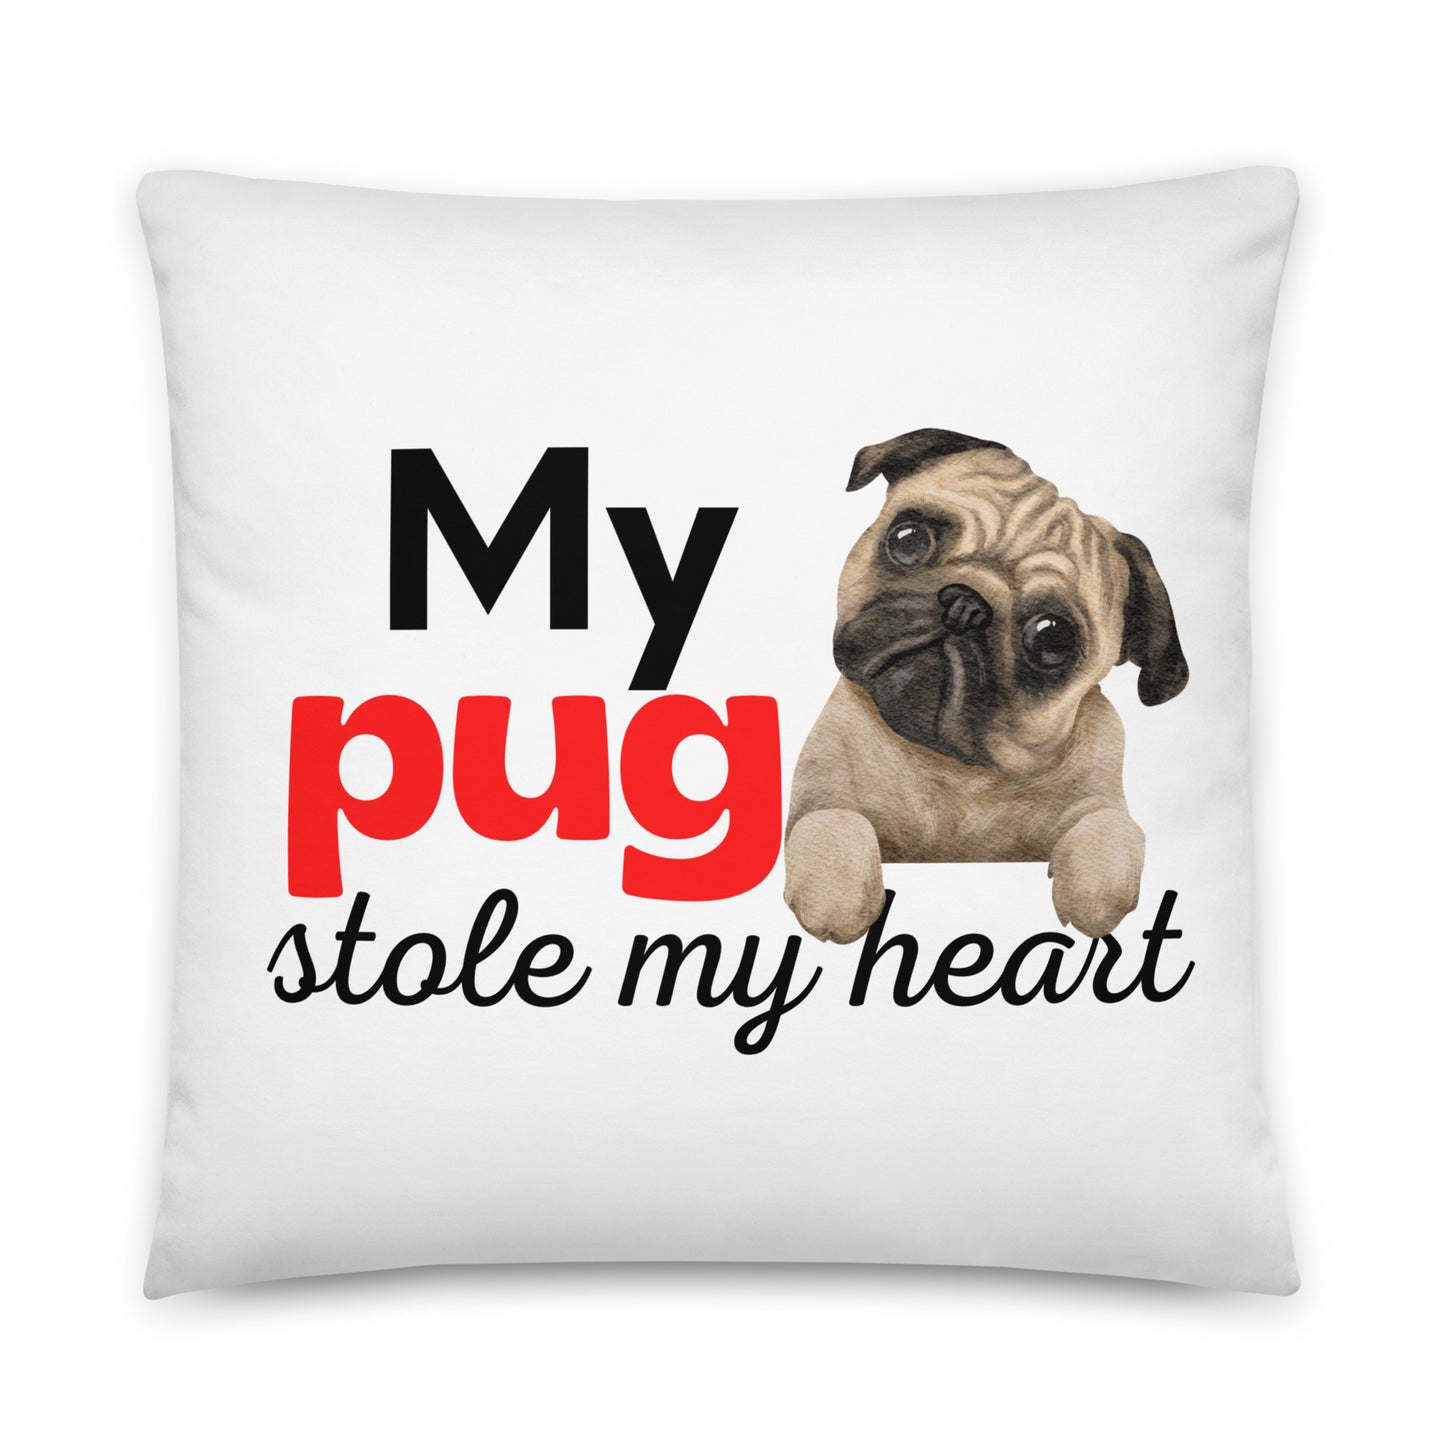 White Pillow 'My Pug stole my heart'